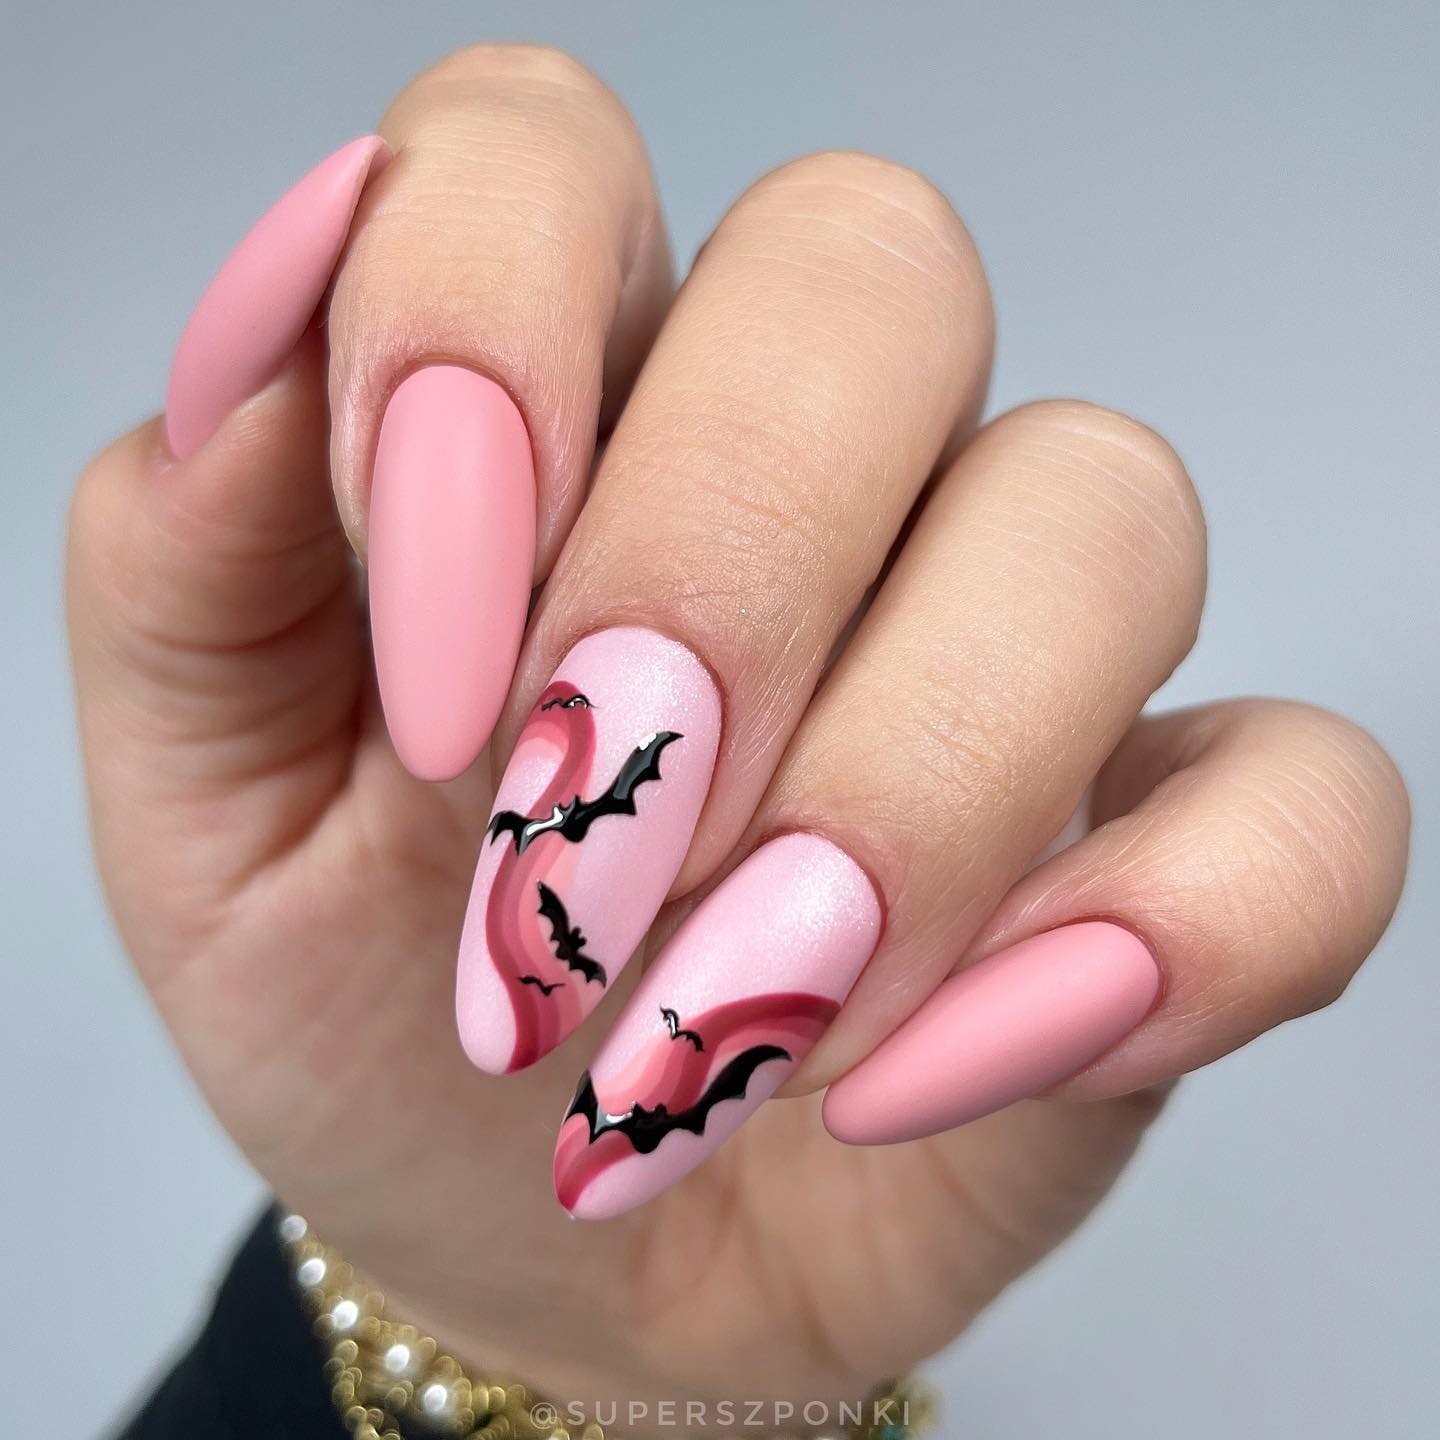 Bats are dark animals and most people are scared of them but in this nail design, two opposing colors which are soft pink and black are combined to create contrast. Accent nails with a pink swirl nail art look amazing with flying bats.